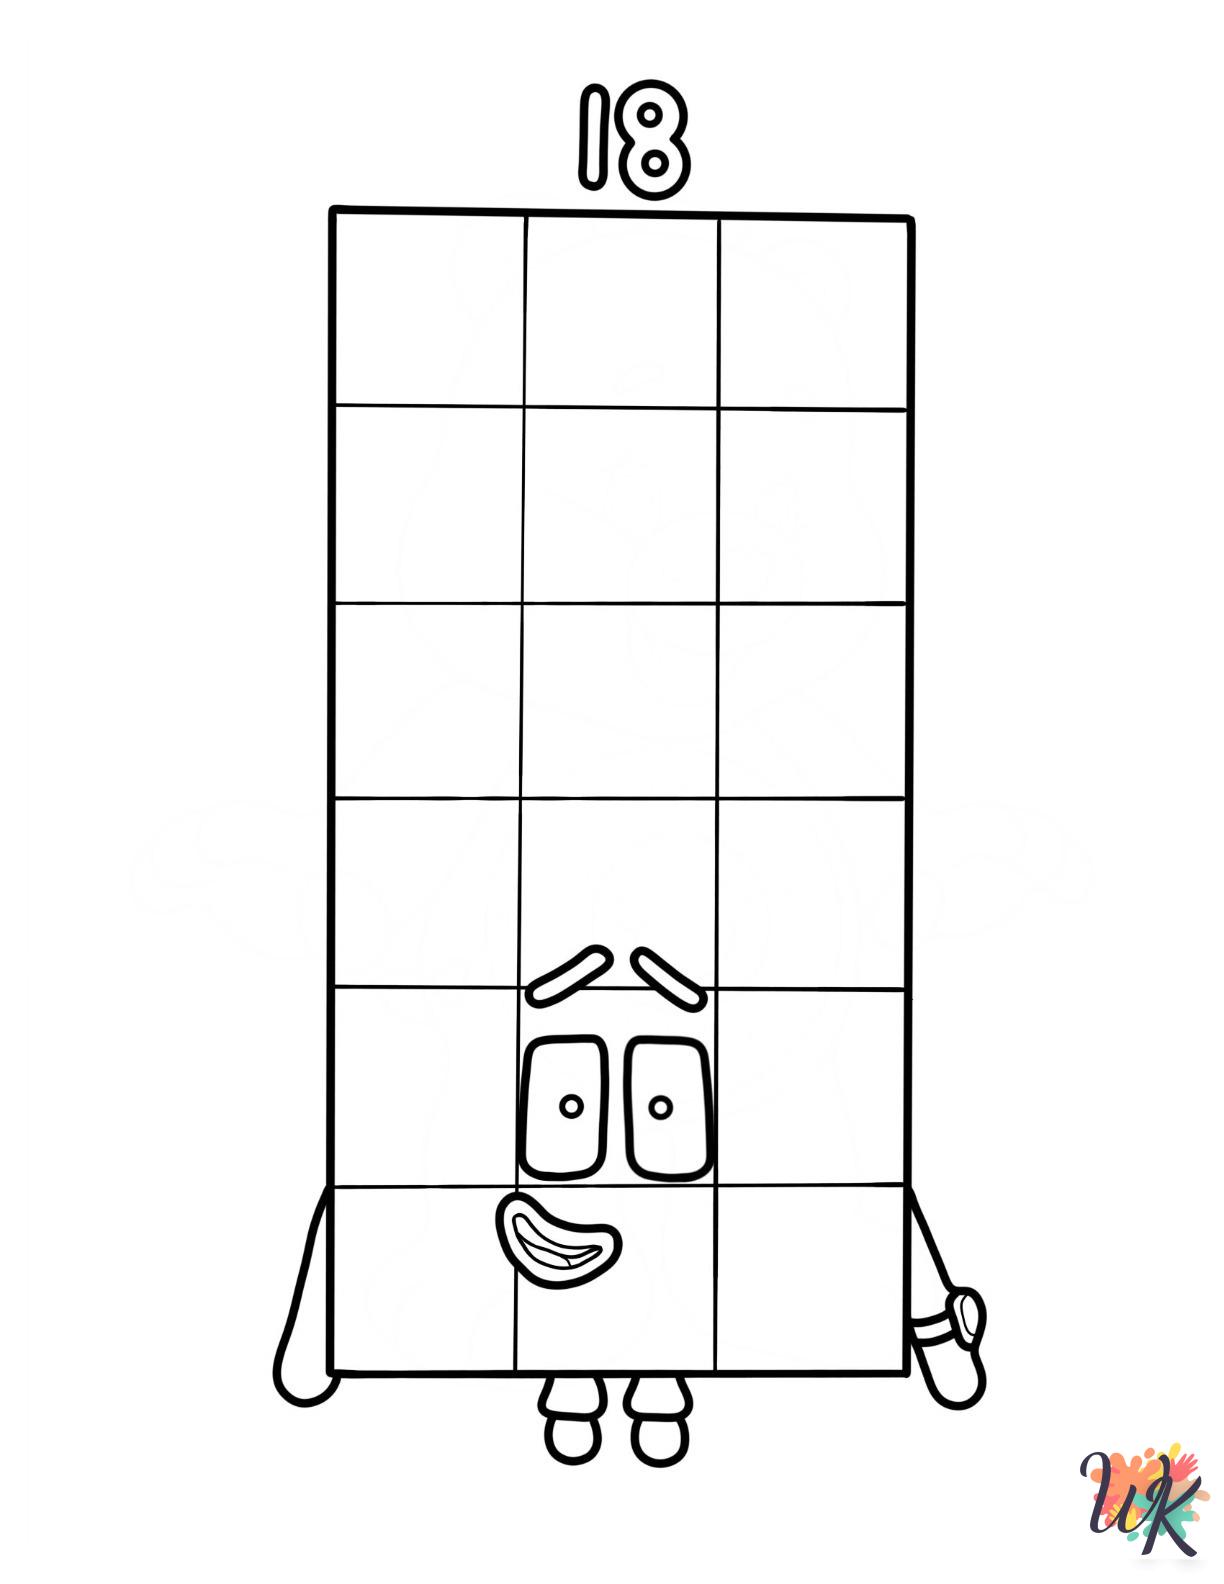 Numberblocks coloring pages for adults easy